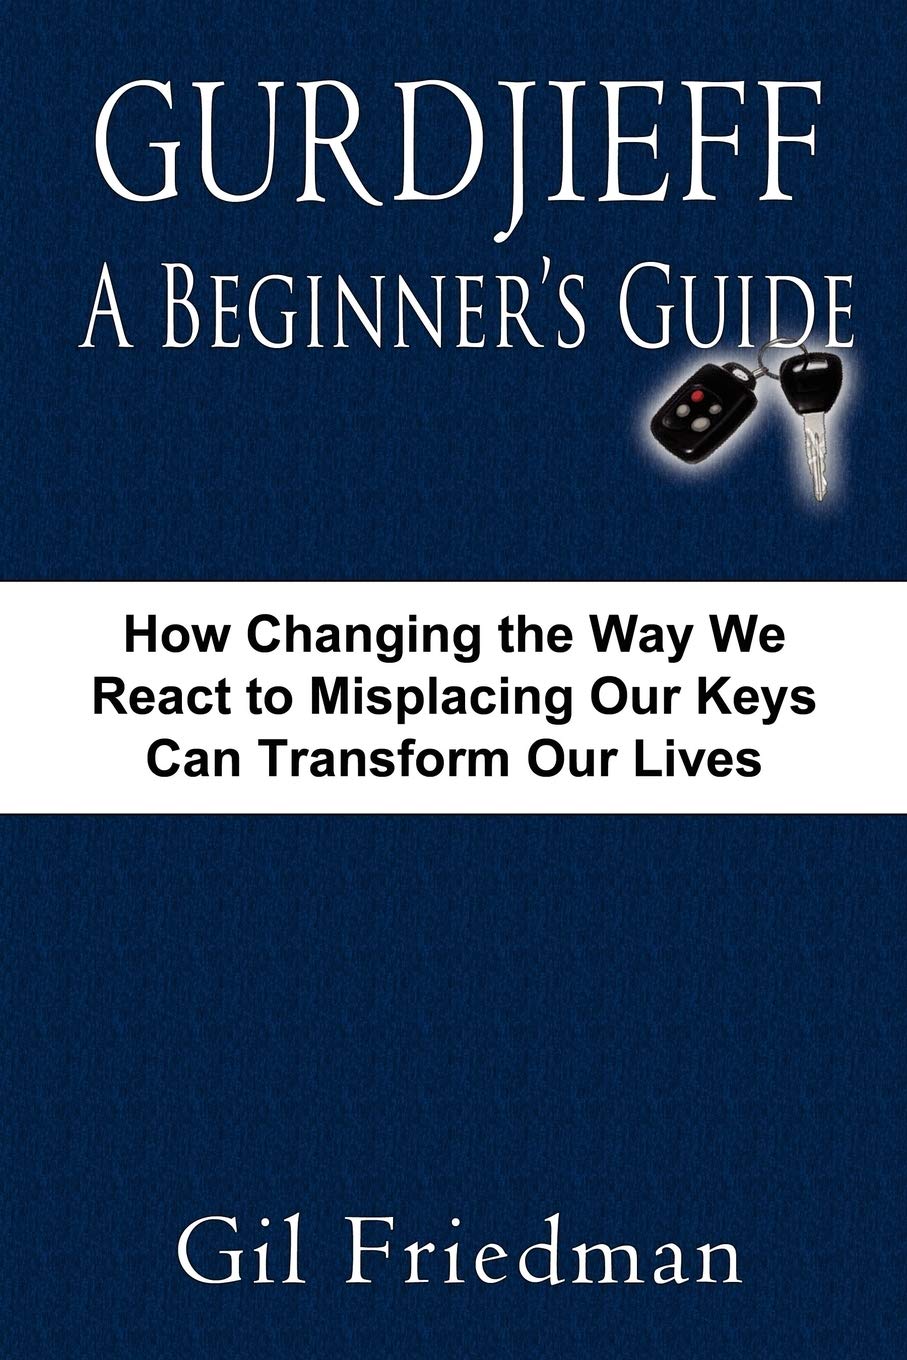 Review of Gurdjieff: A Beginner’s Guide by Gil Friedman. How Changing The Way We React To Misplacing Our Keys Can Transform Our Lives